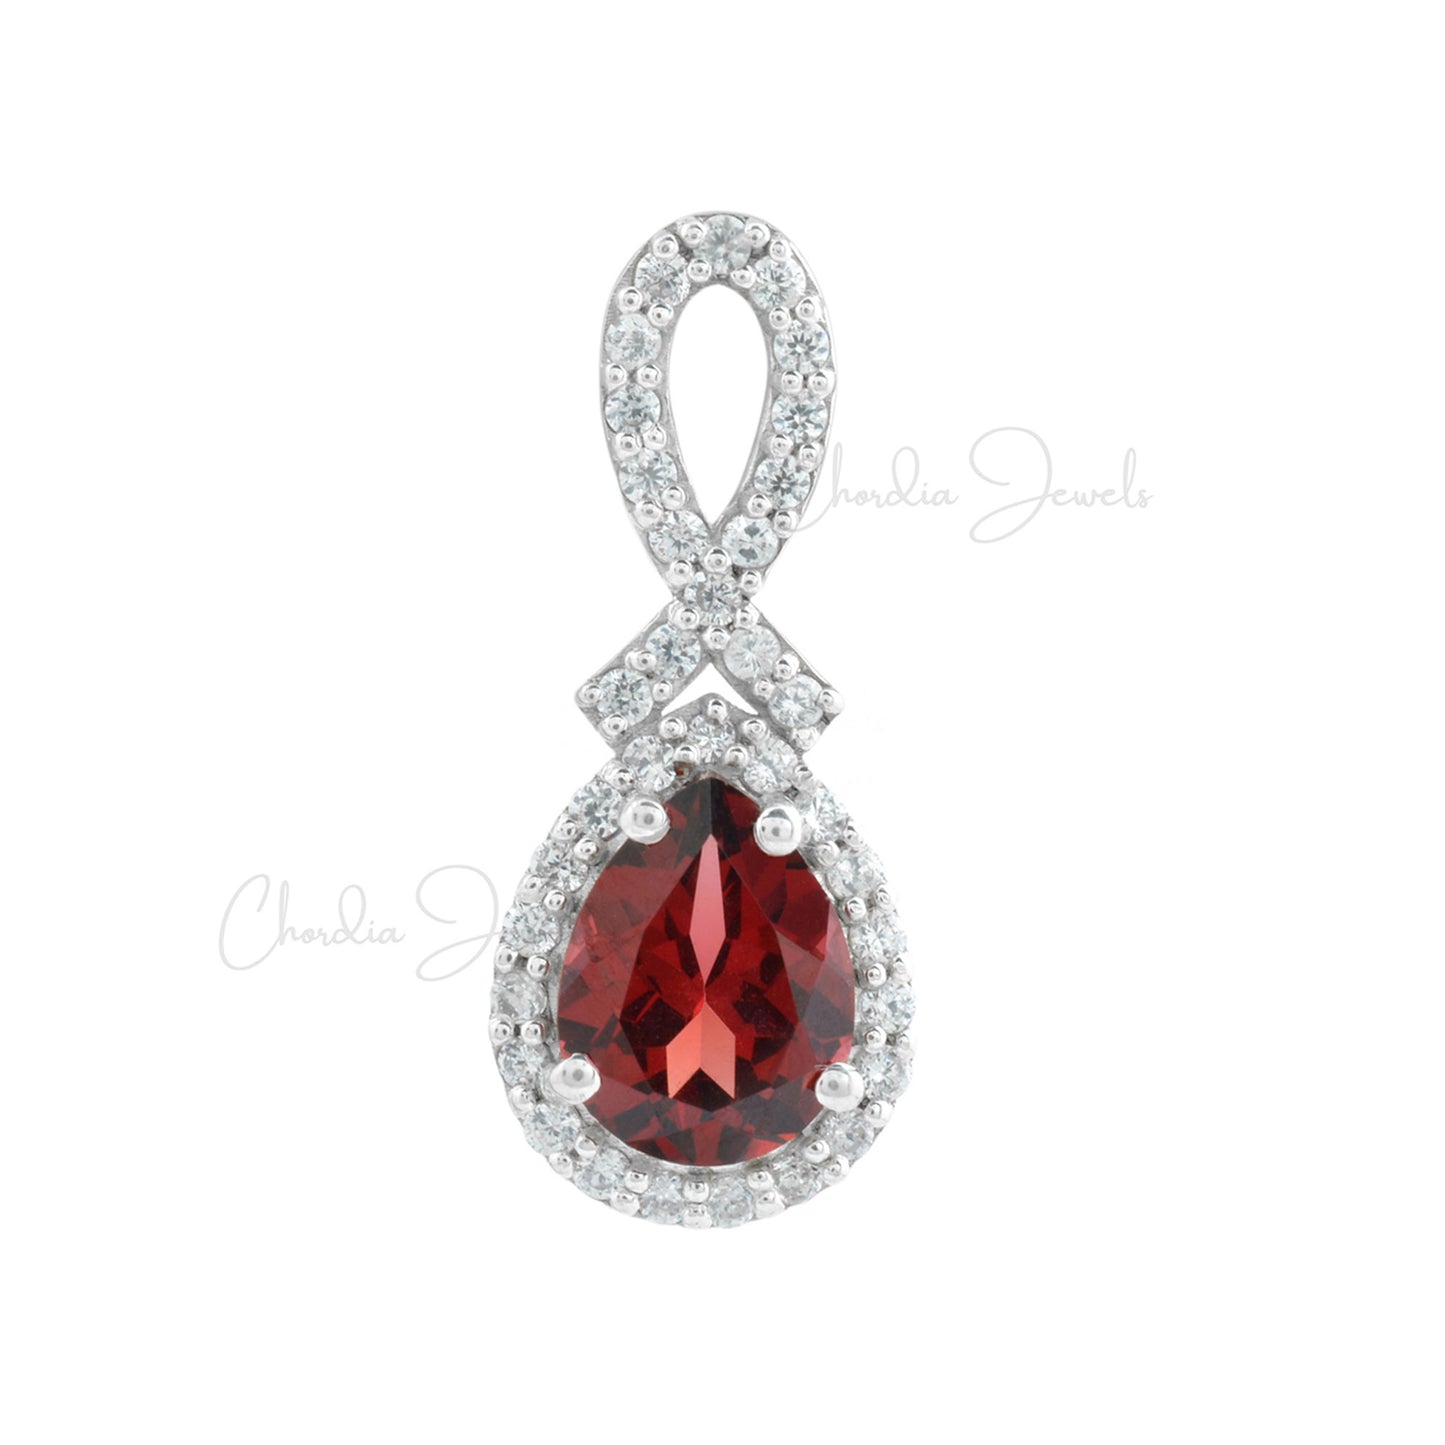 925 Sterling Silver Authentic Garnet Gemstone Infinity Pendant with Zircon Accents January Birthstone Pendant At Offer Price